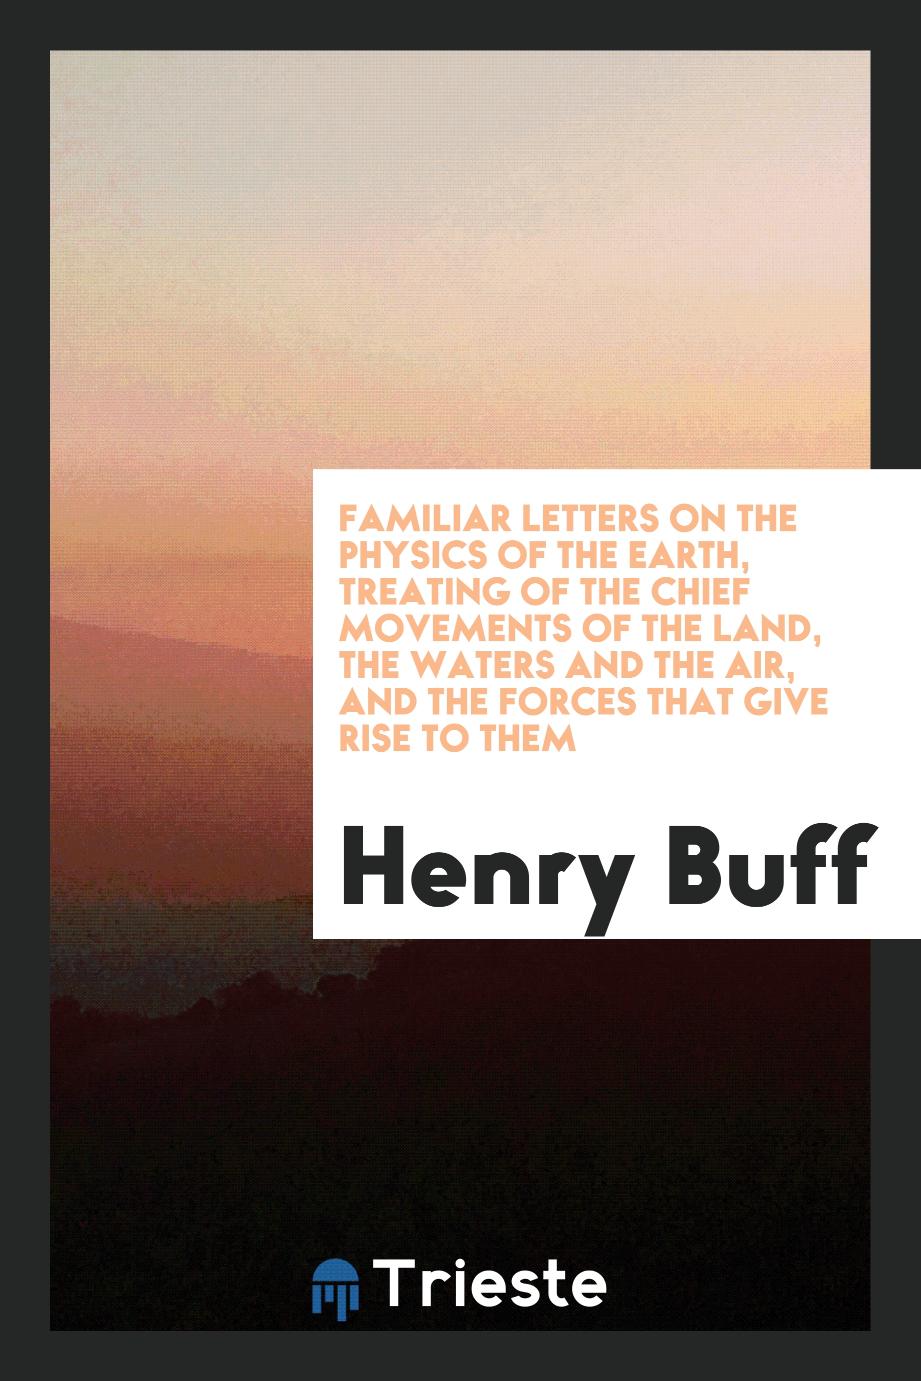 Familiar letters on the physics of the Earth, treating of the chief movements of the land, the waters and the air, and the forces that give rise to them